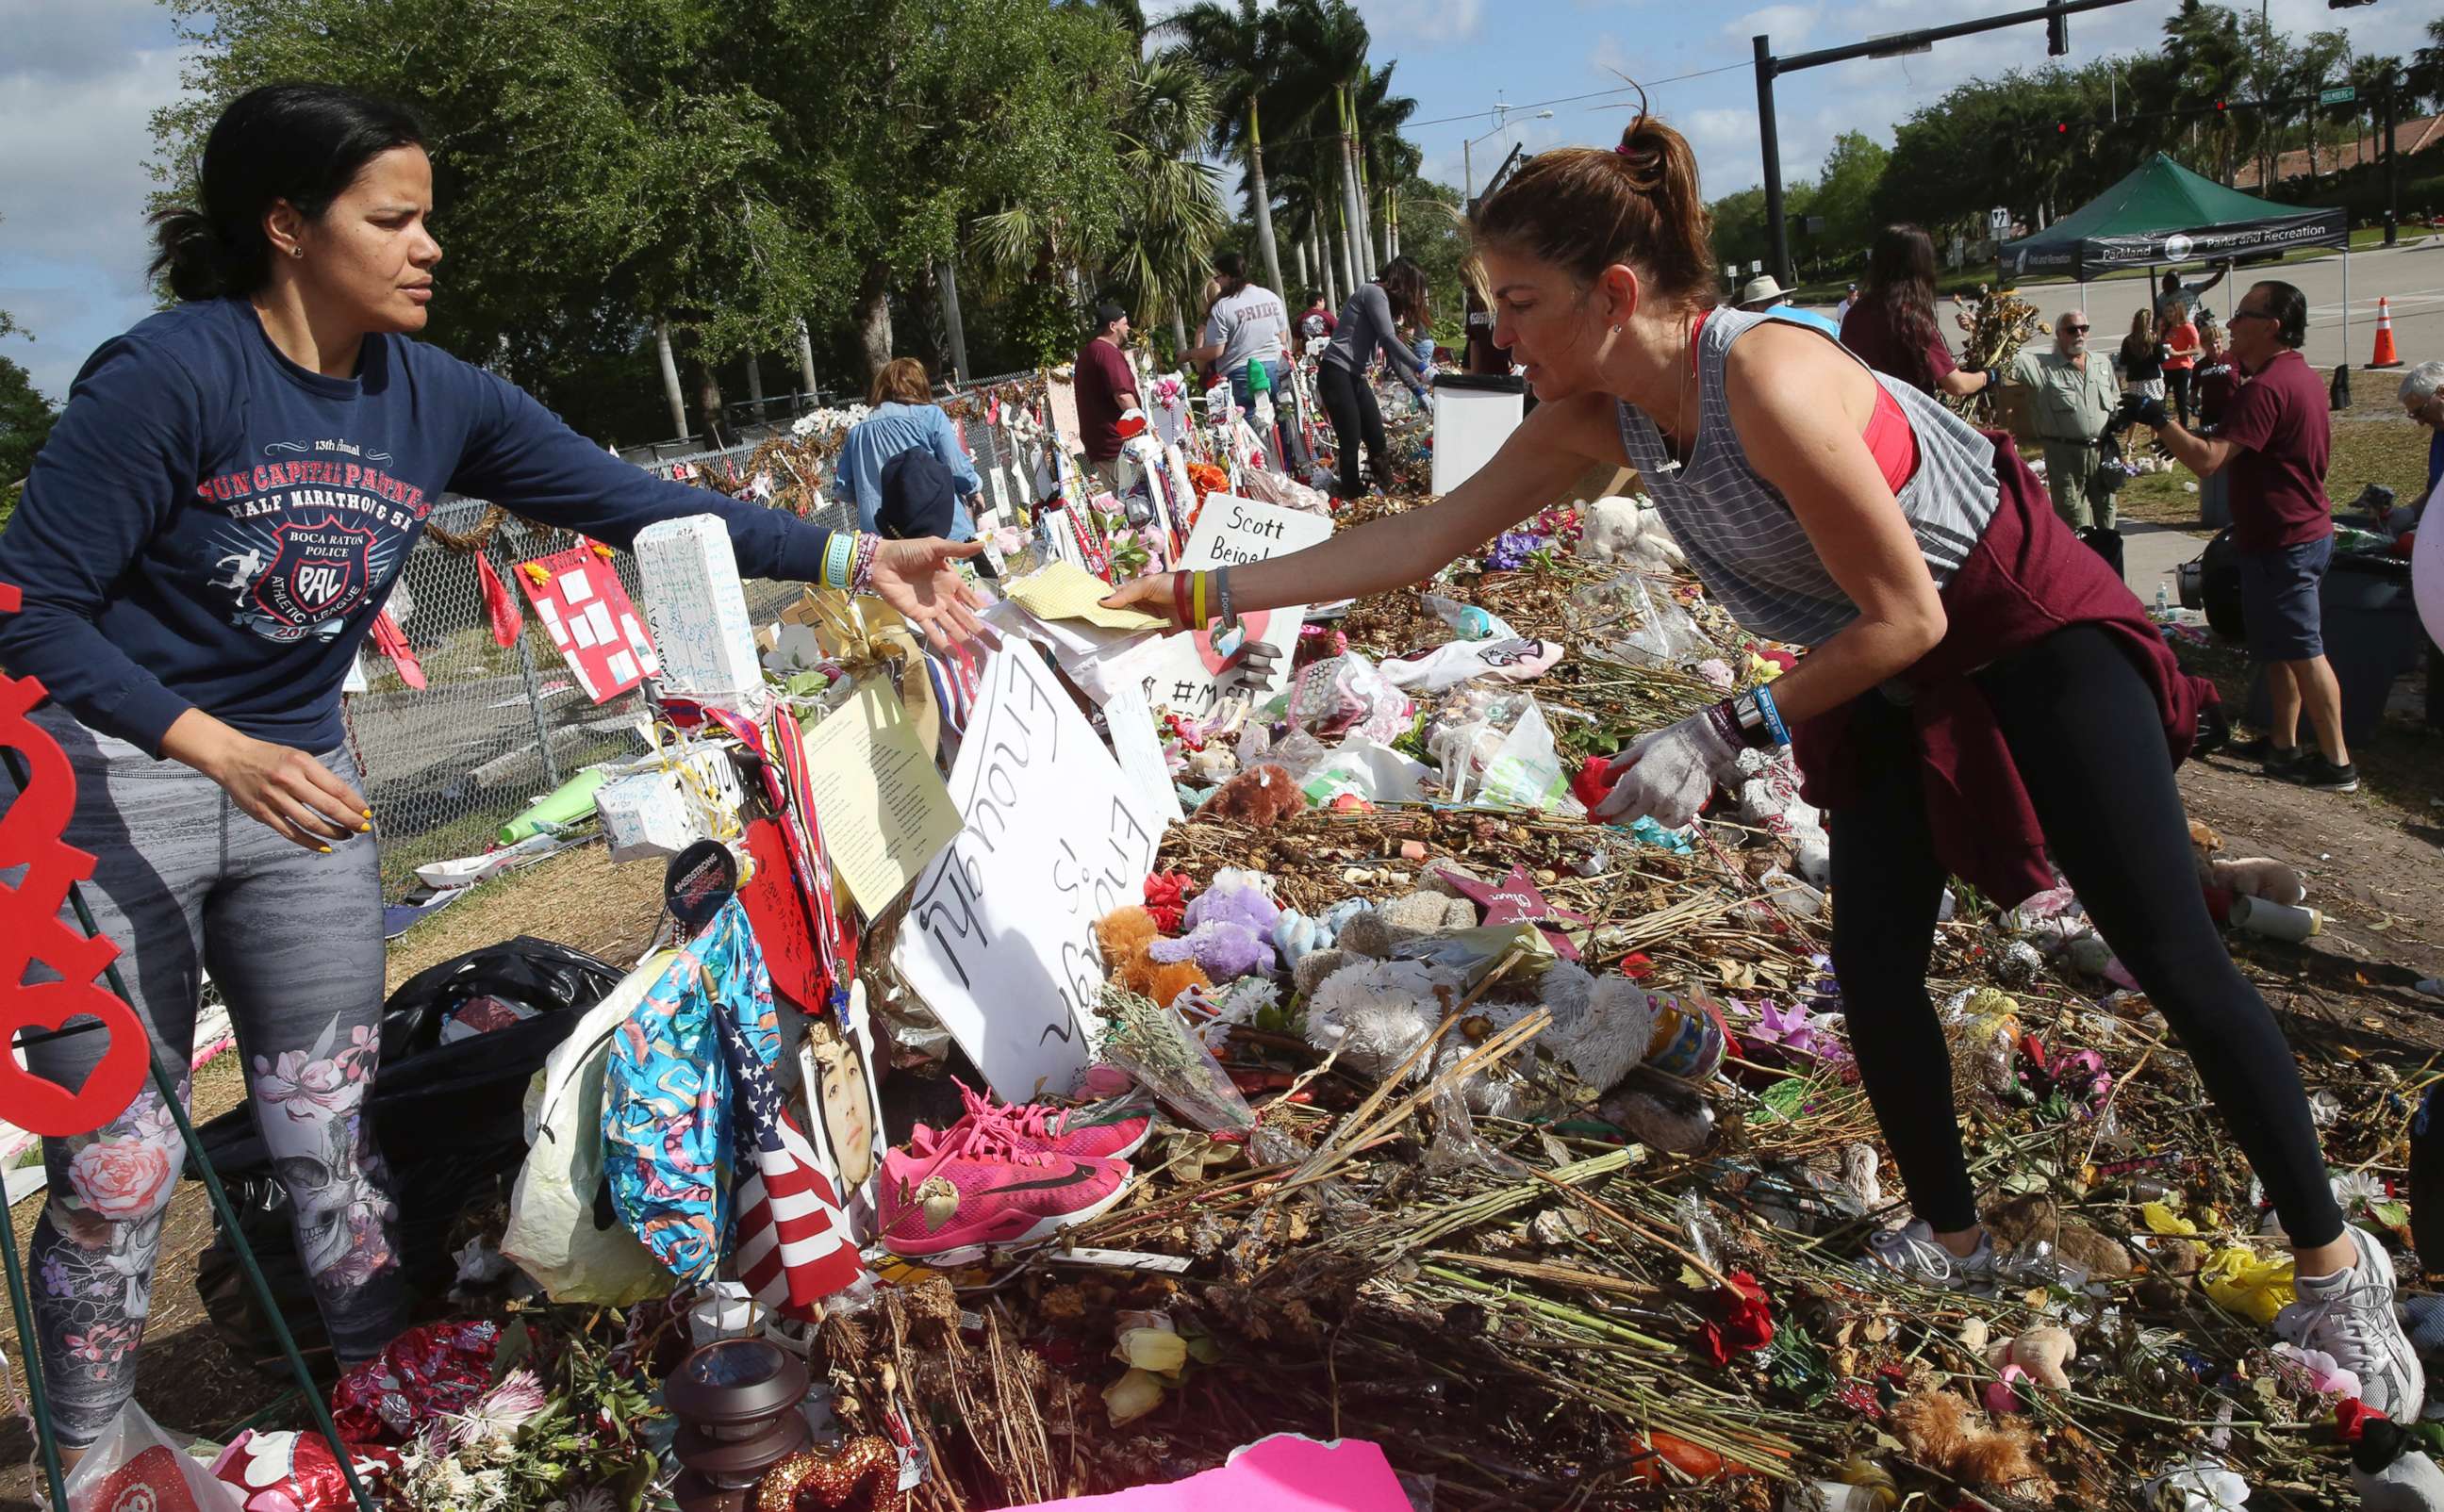 PHOTO: Patricia Padauy, right, passes a handwritten note to her friend Sharamy Angarita, as they clean and sort out items at the memorial site of Padauy's son Joaquin Oliver in Parkland, Fla., March 28, 2018.